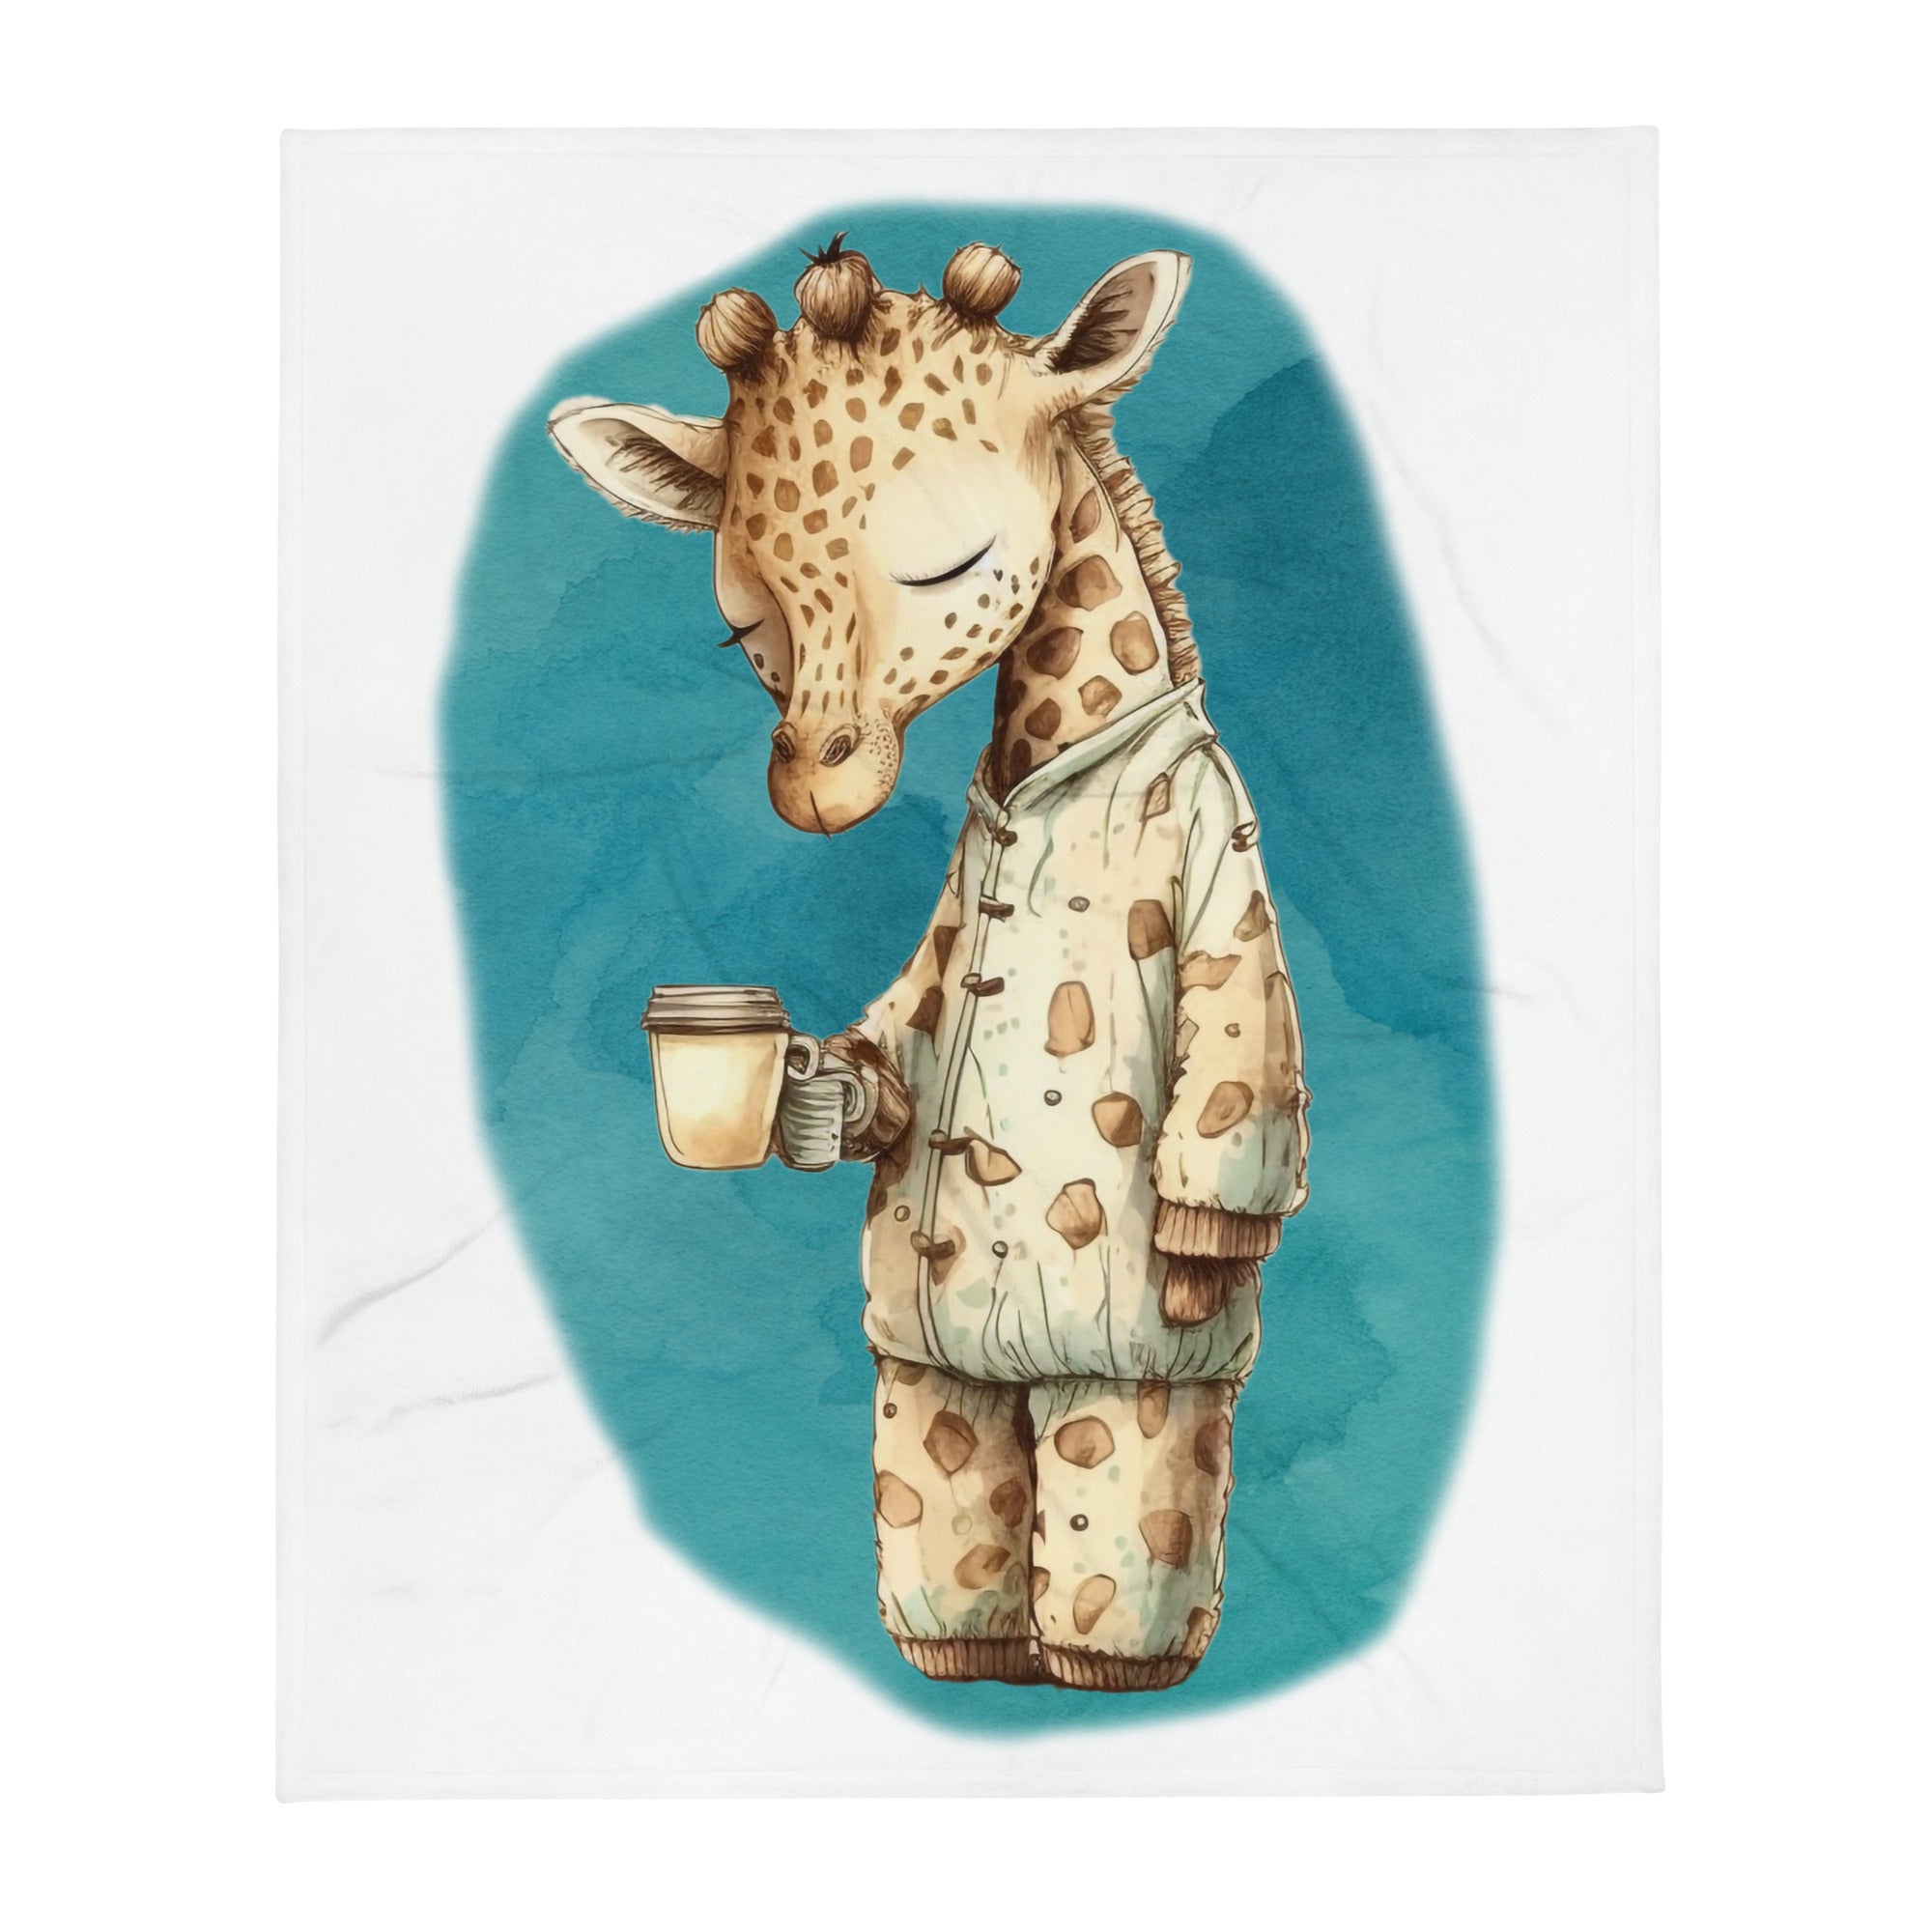 Sleepy Giraffe 100% Polyester Soft Silk Touch Fabric Throw Blanket - Cozy, Durable and Adorable